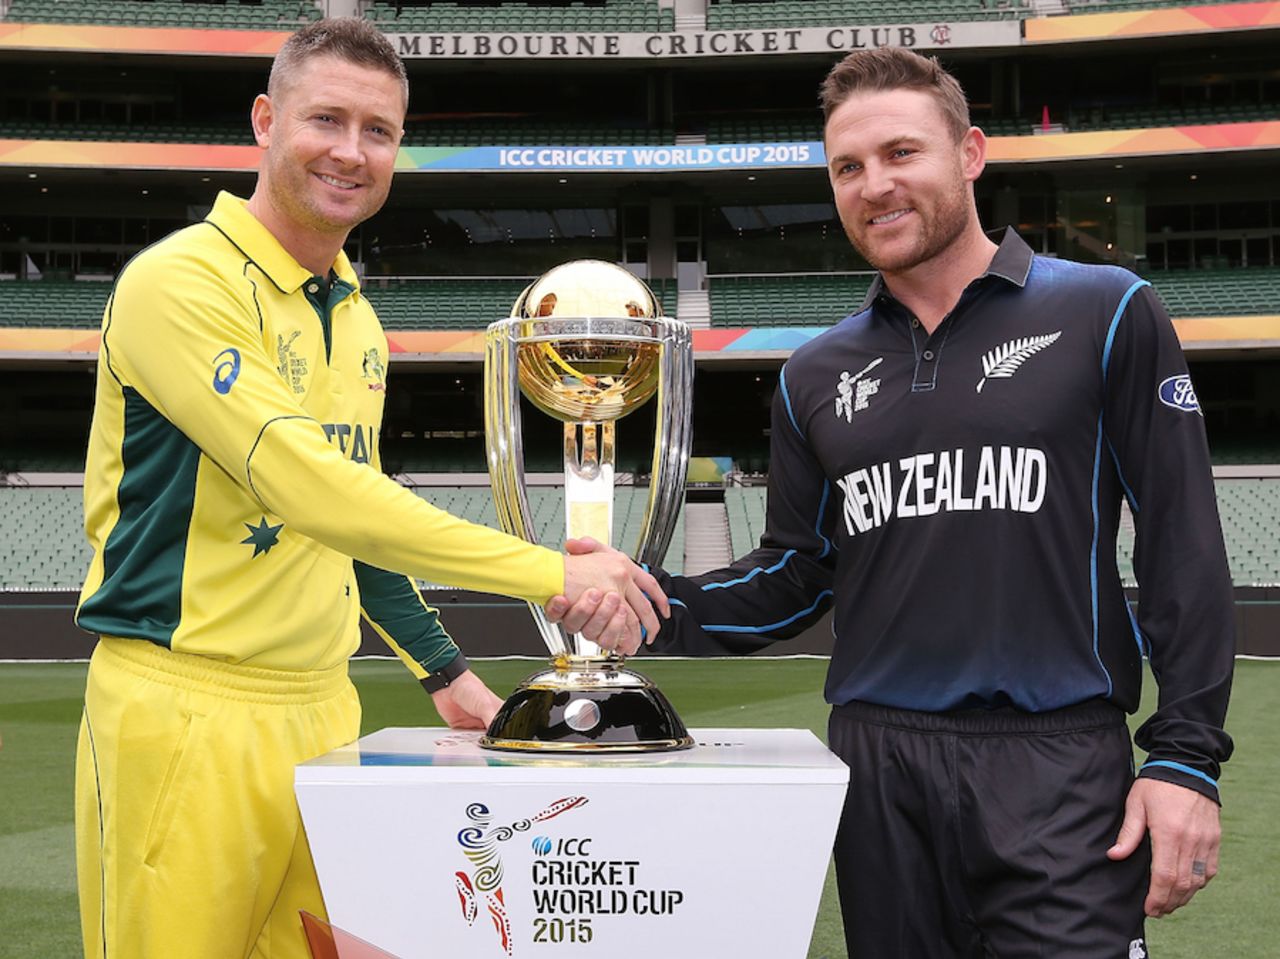 Michael Clarke and Brendon McCullum pose with the World Cup trophy, World Cup 2015, Melbourne, March 28, 2015